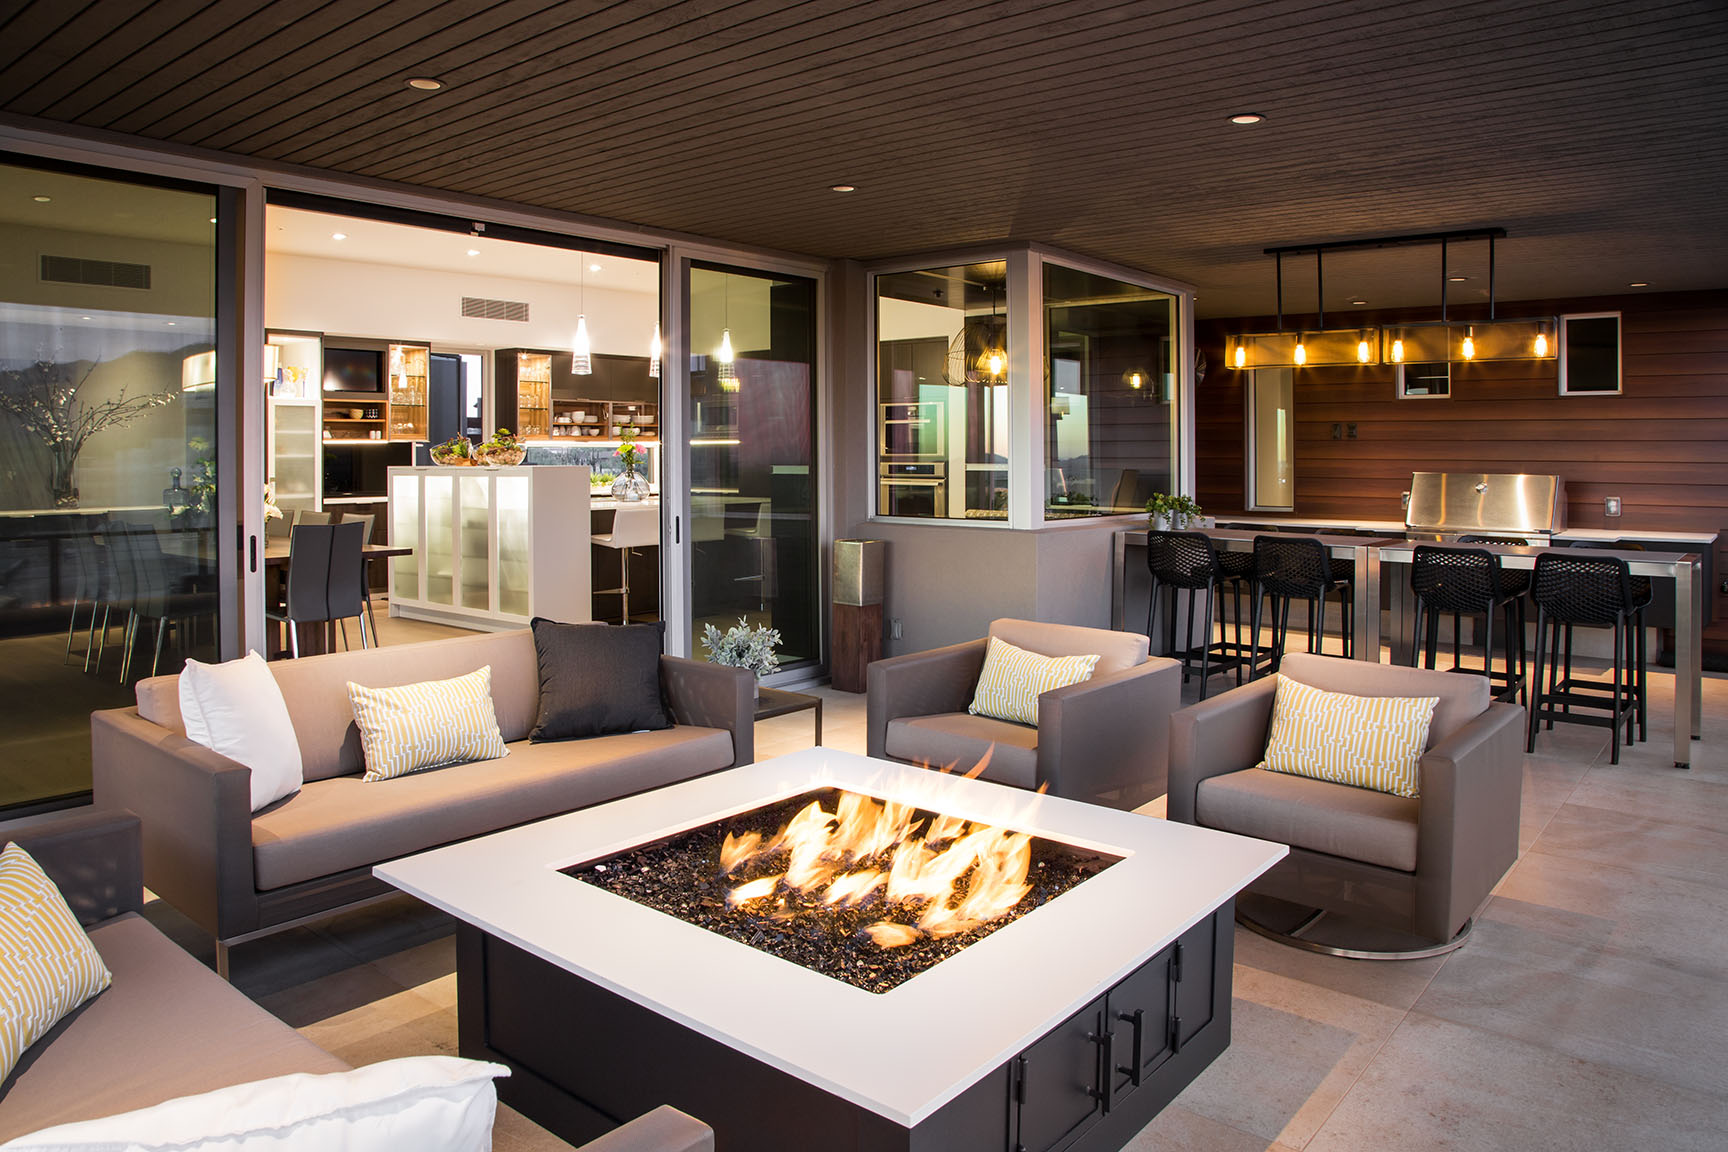 A covered, outdoor seating area with a fire pit in front of a bi-parting, sliding door.